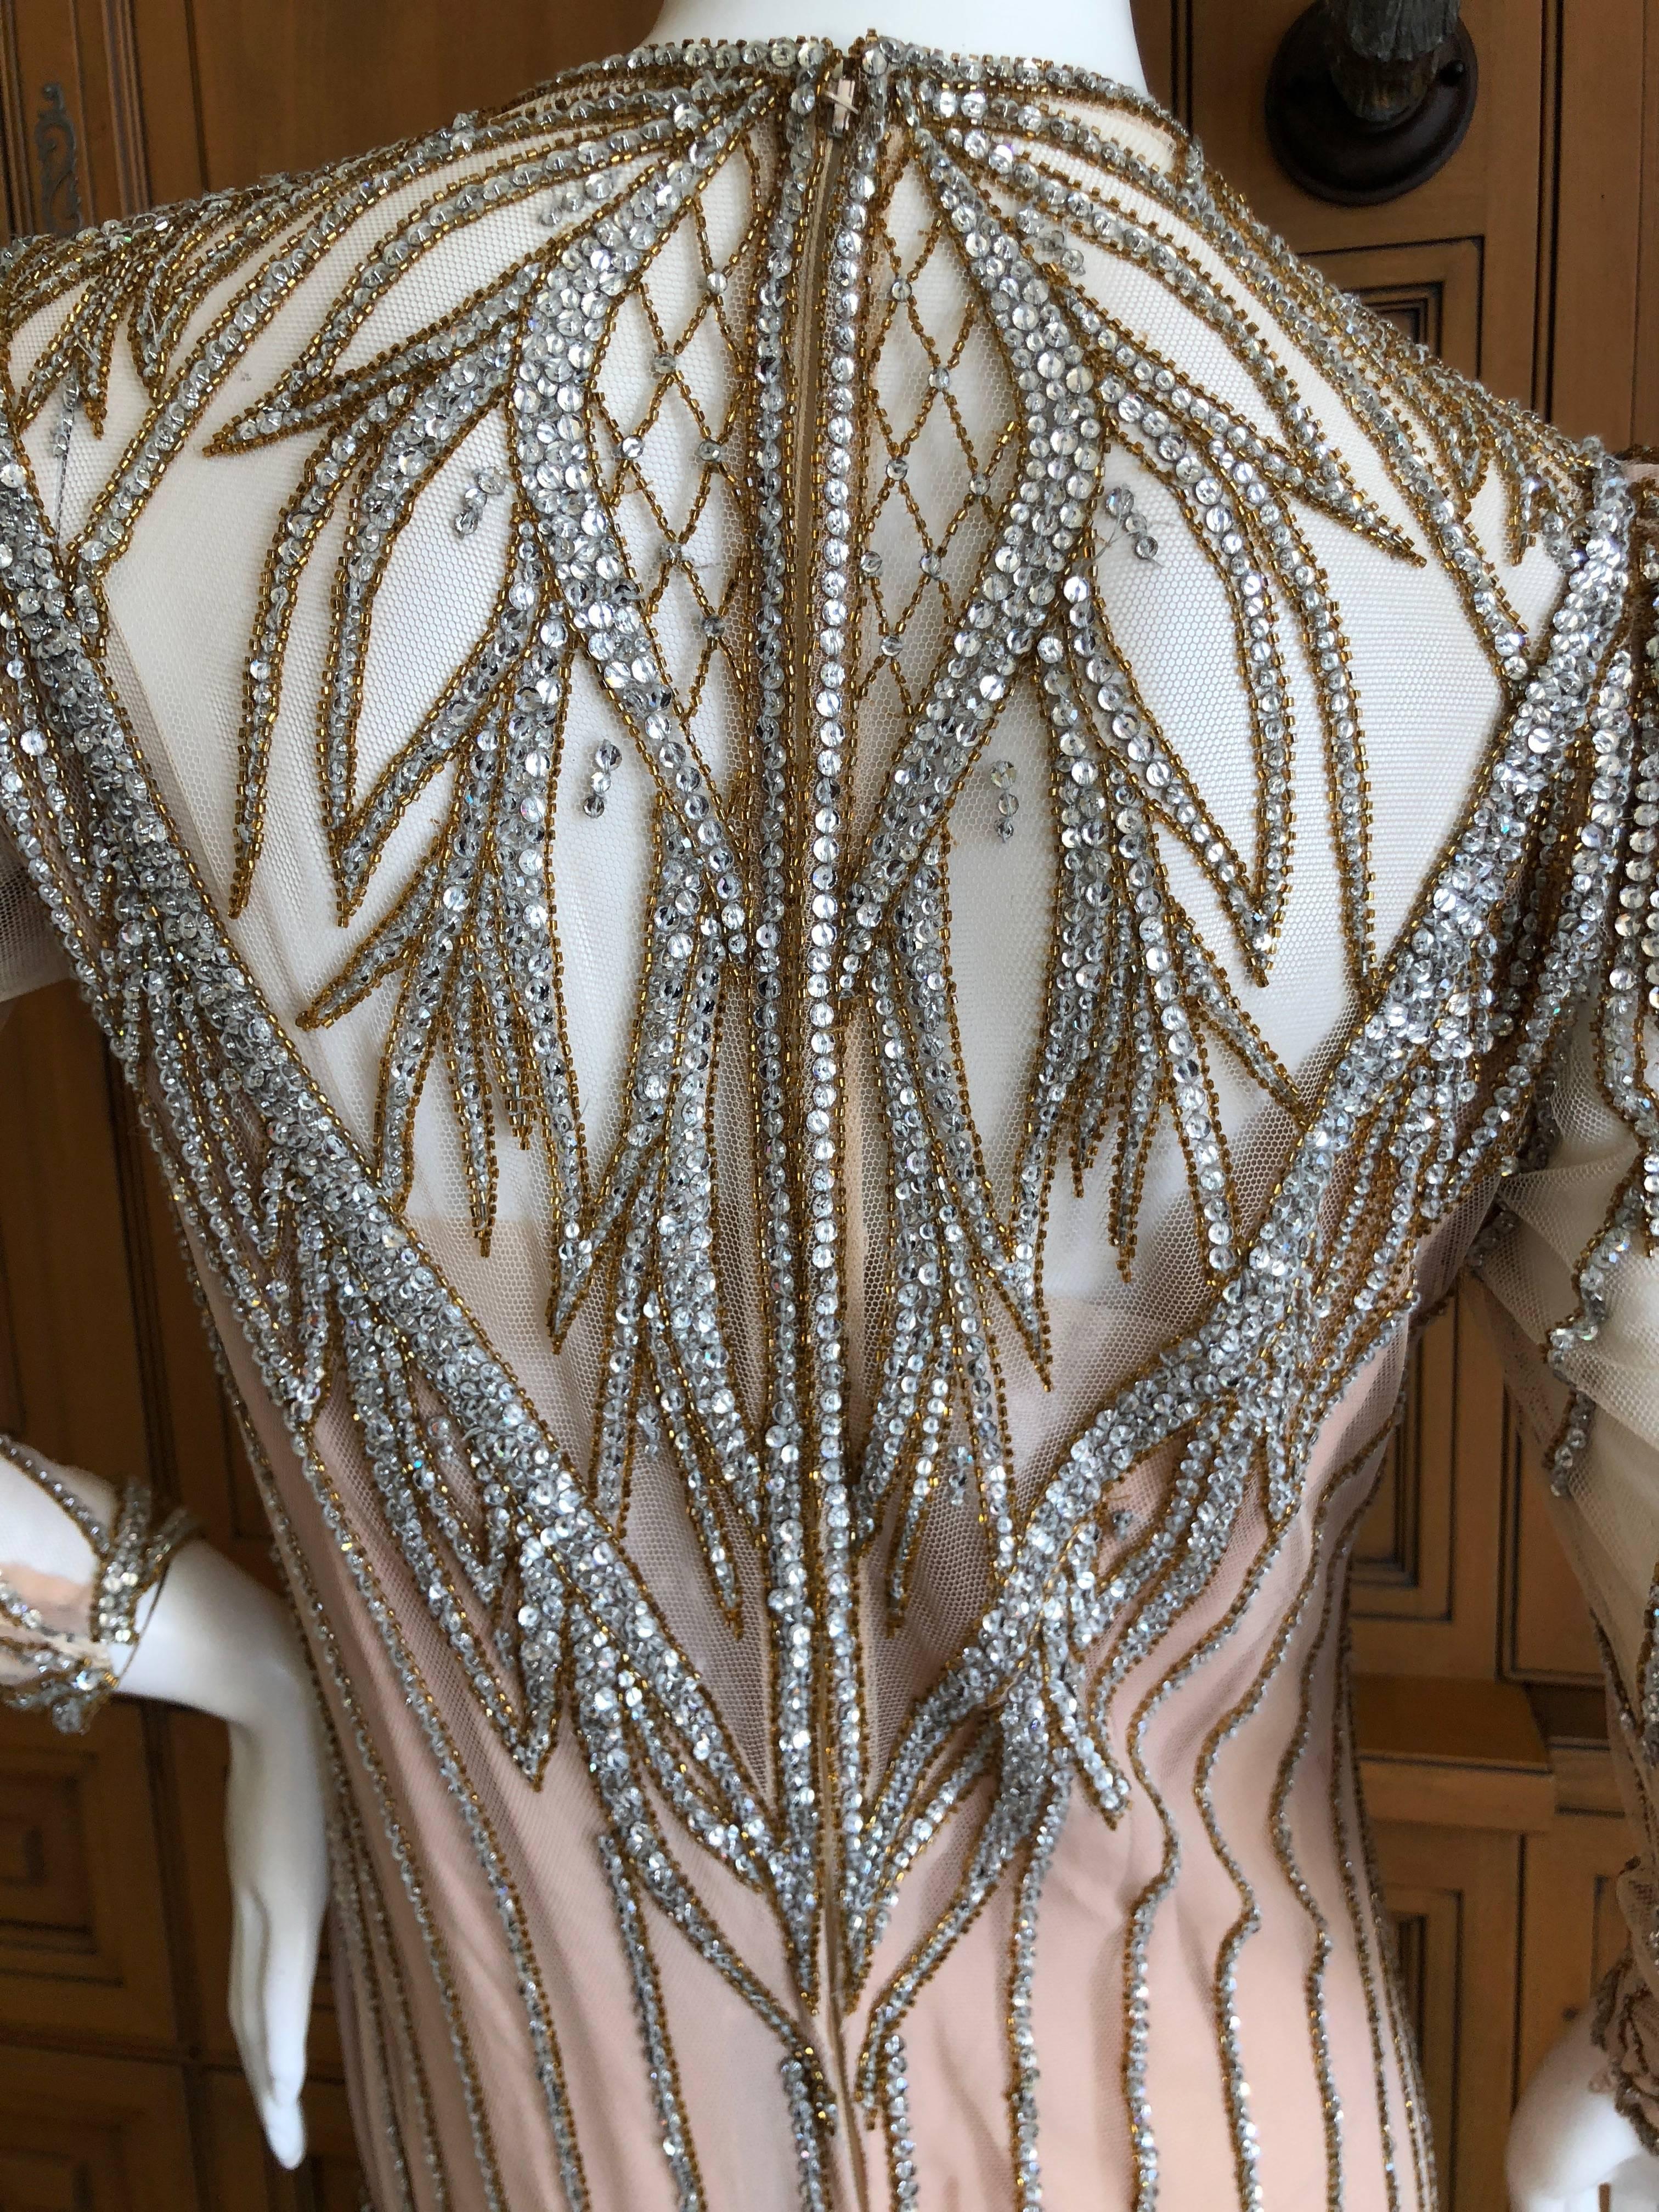 Bob Mackie Nieman Marcus 1980's Crystal Beaded Sheer Evening Dress
Ivory with silver and gold accents, with clear crystals
Uneven hemline, longer in the back, with fringe bead details.
So much prettier than the photos, please use zoom feature to see